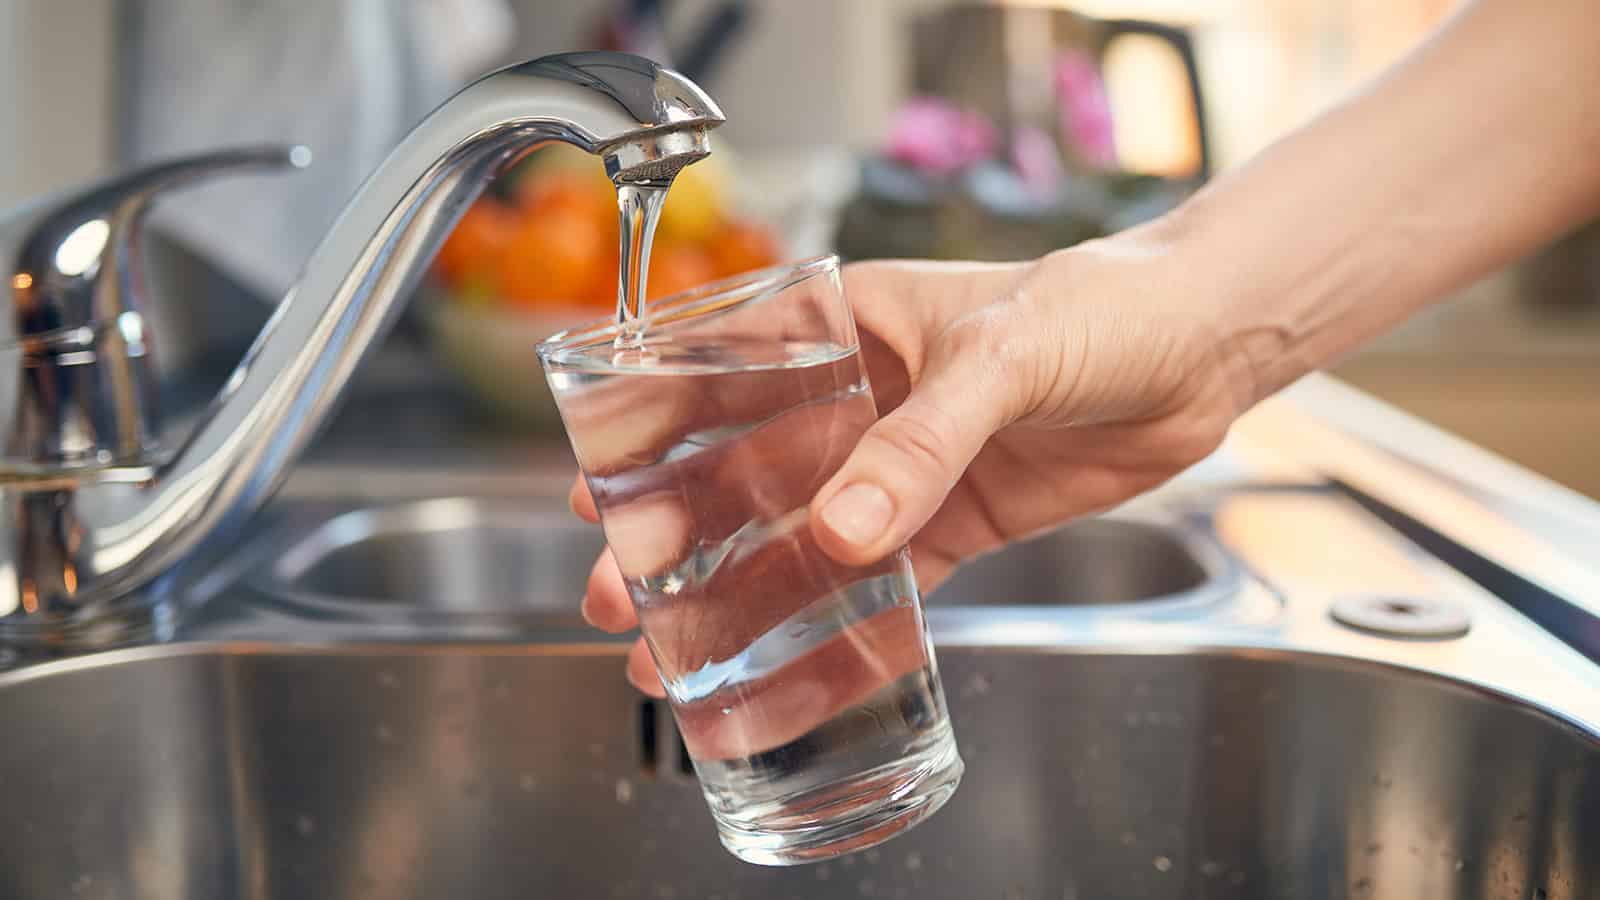 Drinking Tap Water Can Stop Ingestion of Microplastics, According to Research